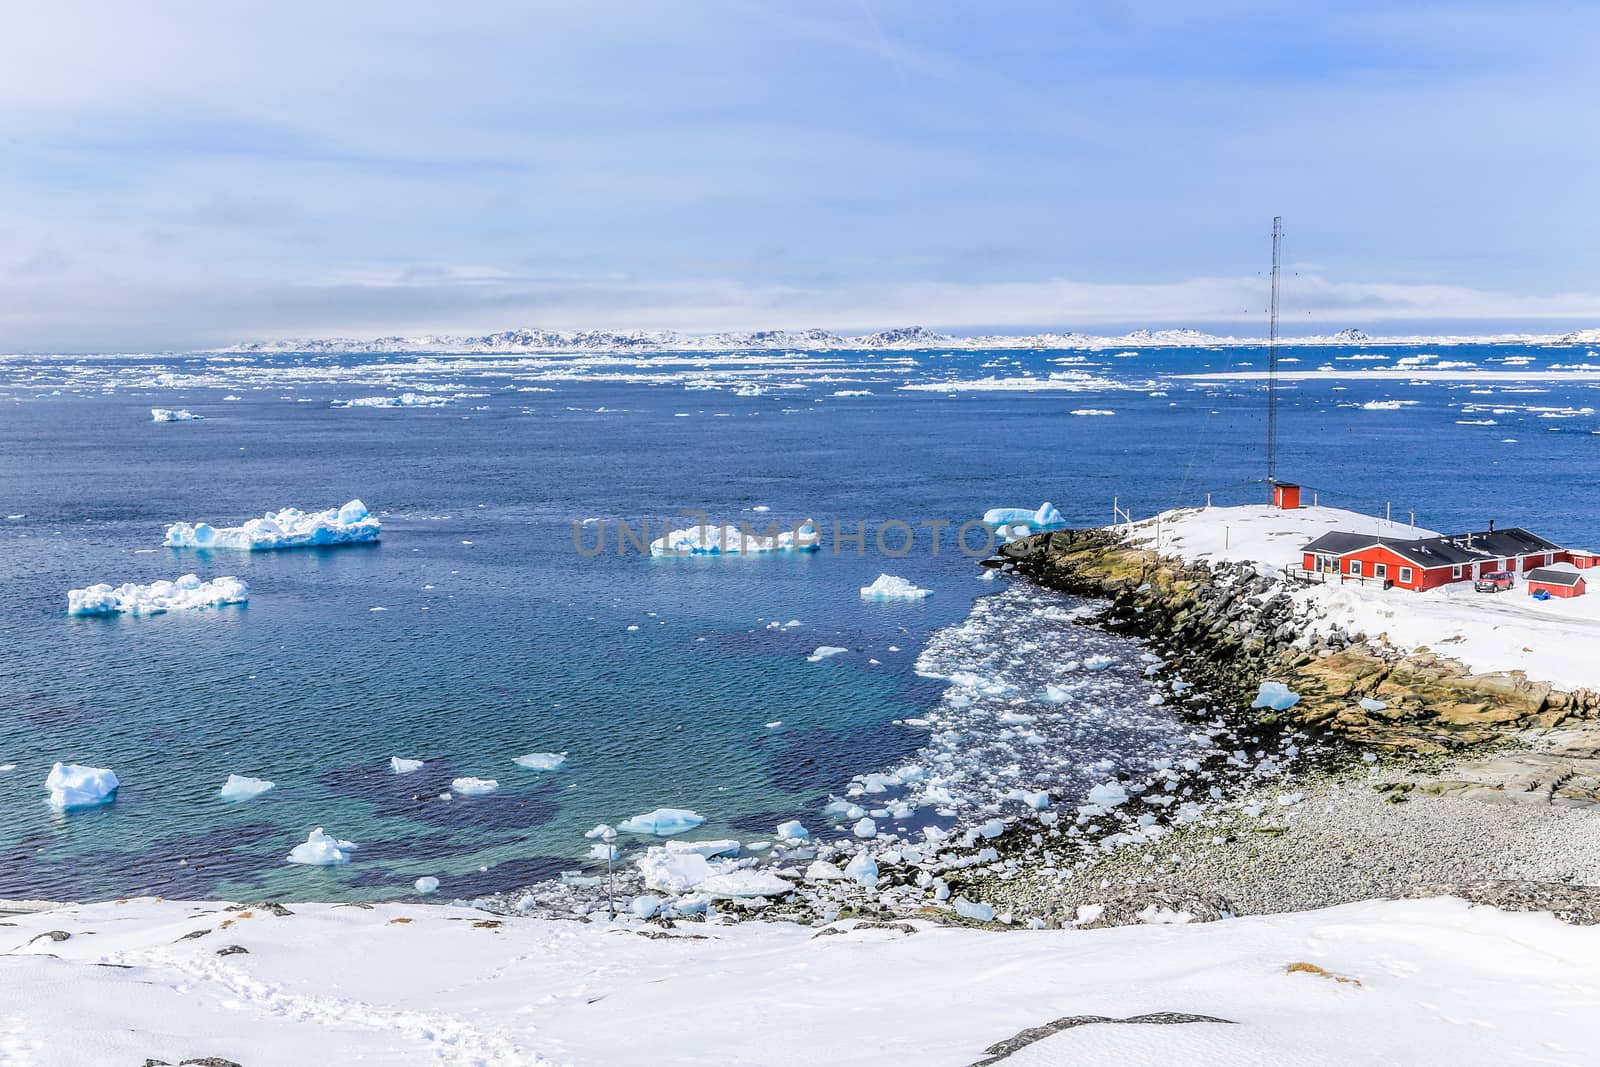 View from the old harbor to the Nuuk fjord, Greenland